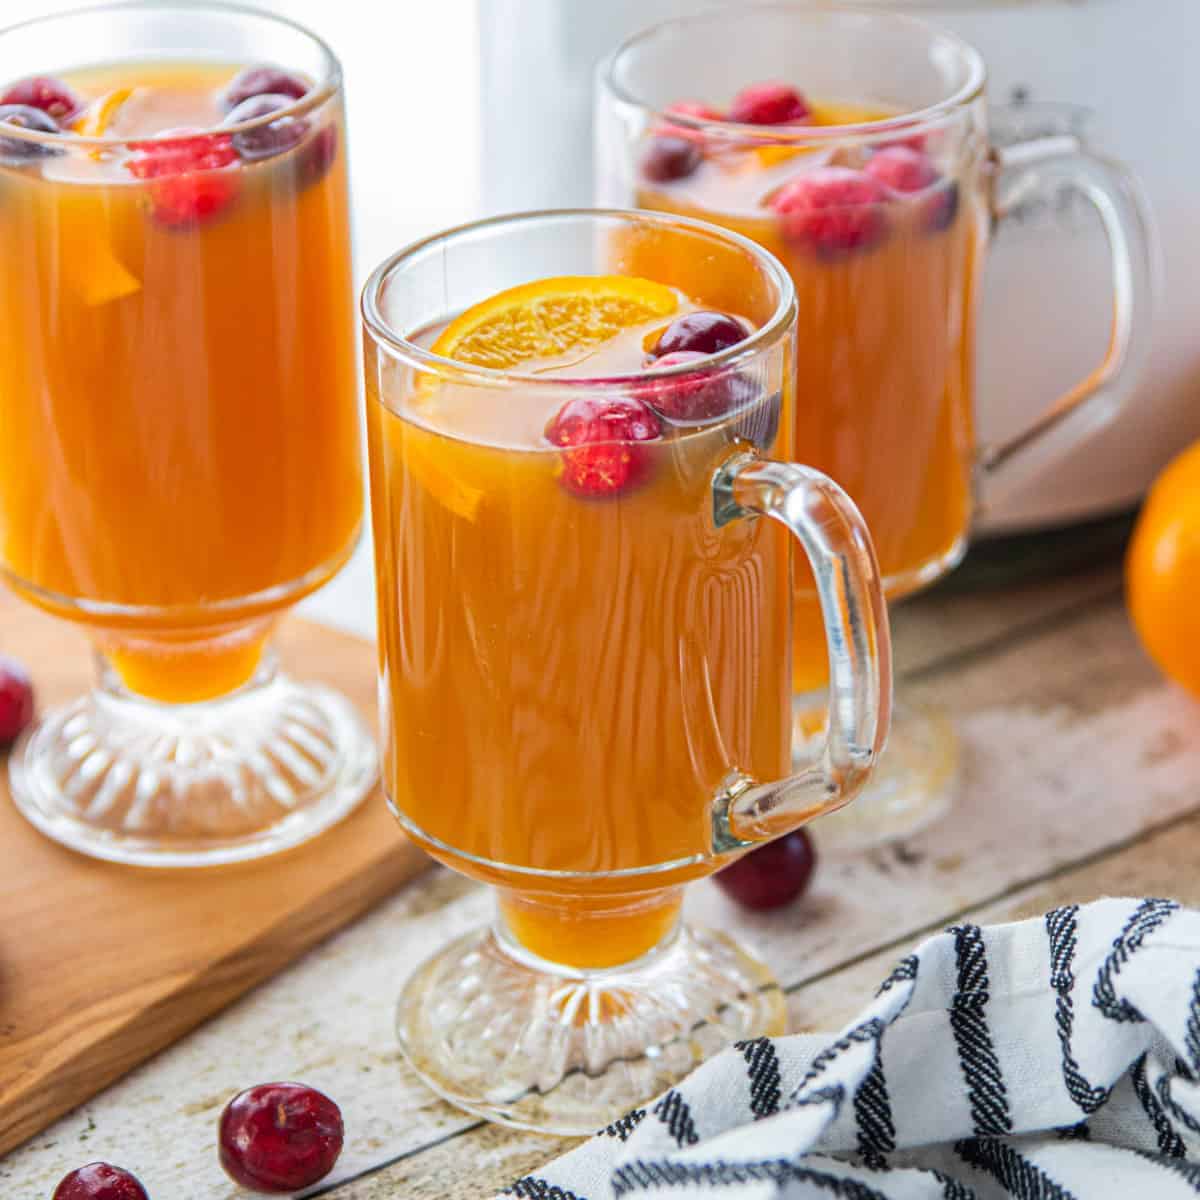 spiced apple cider in glass mugs with whole cranberries and orange slices.